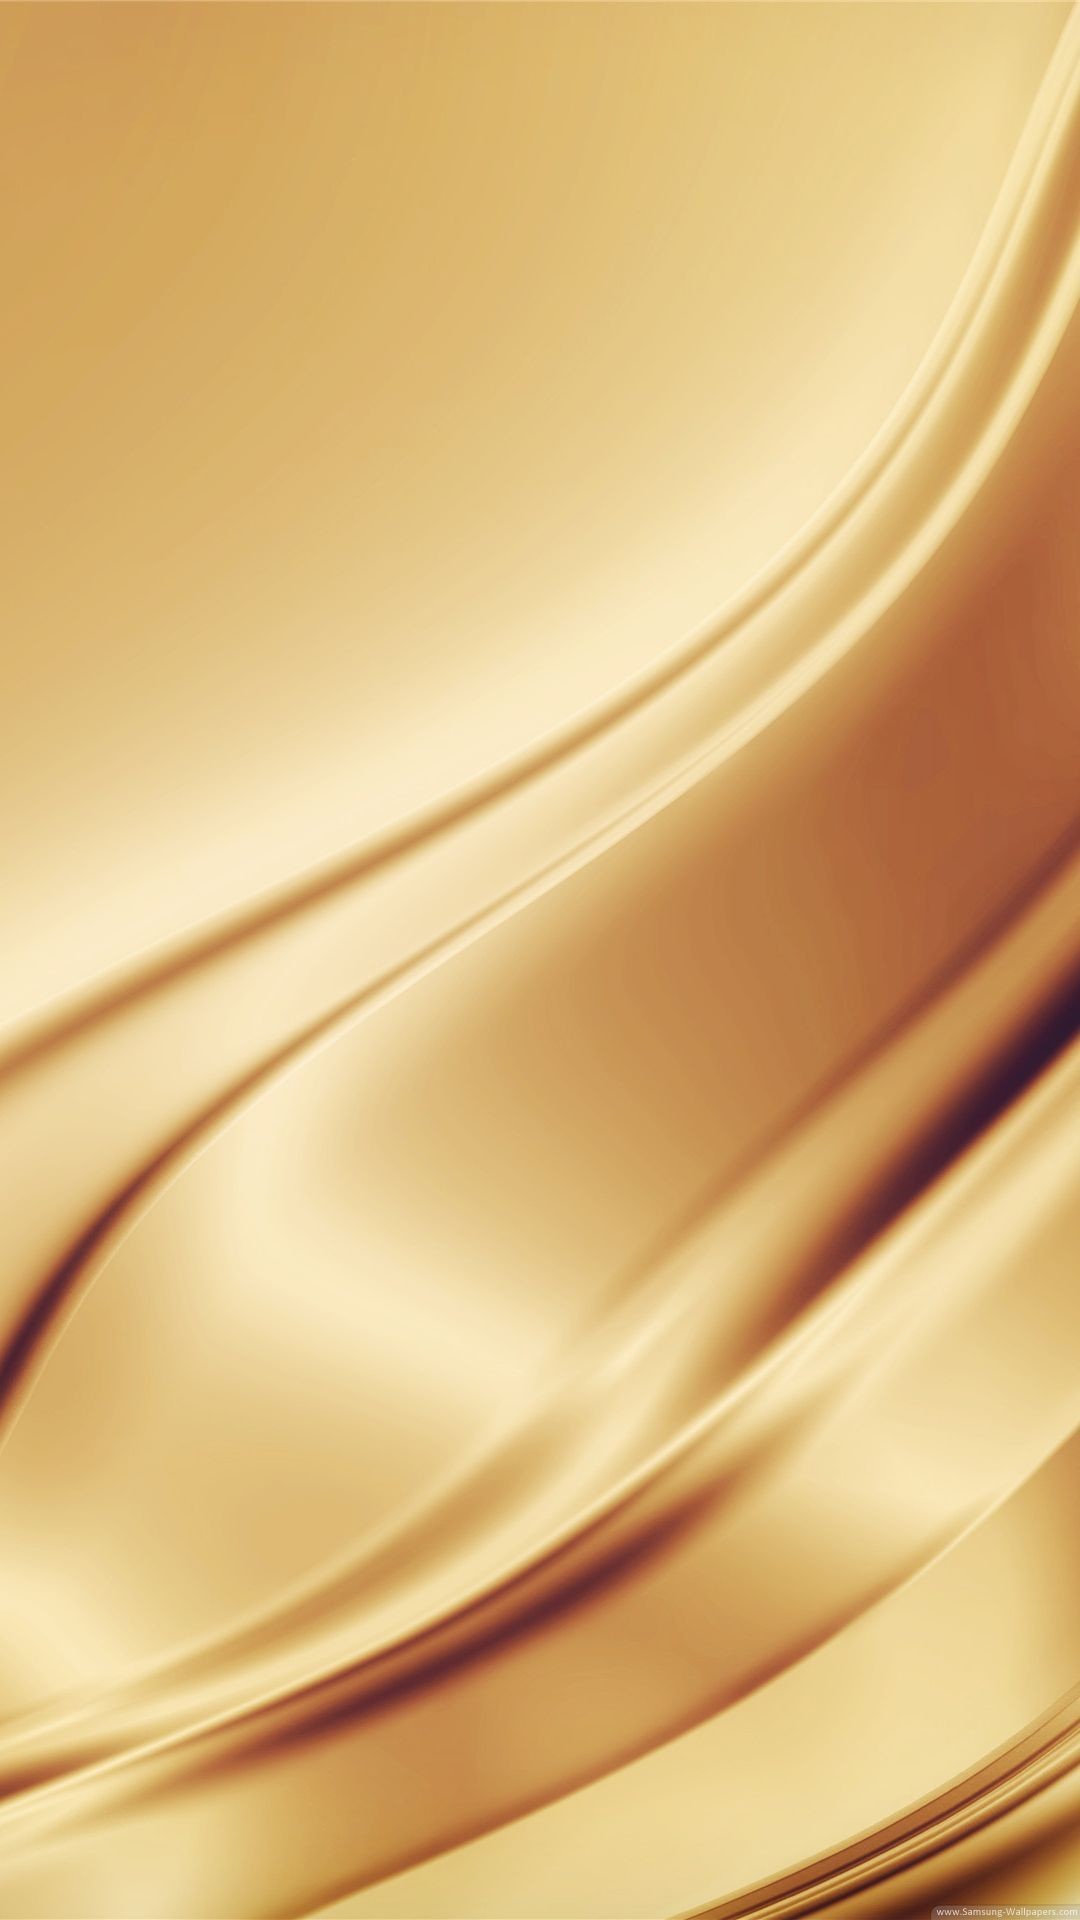 1080x1920 Coolest 15 Galaxy S6 Edge Gold Wallpaper With 1080 x 1080 For free Download